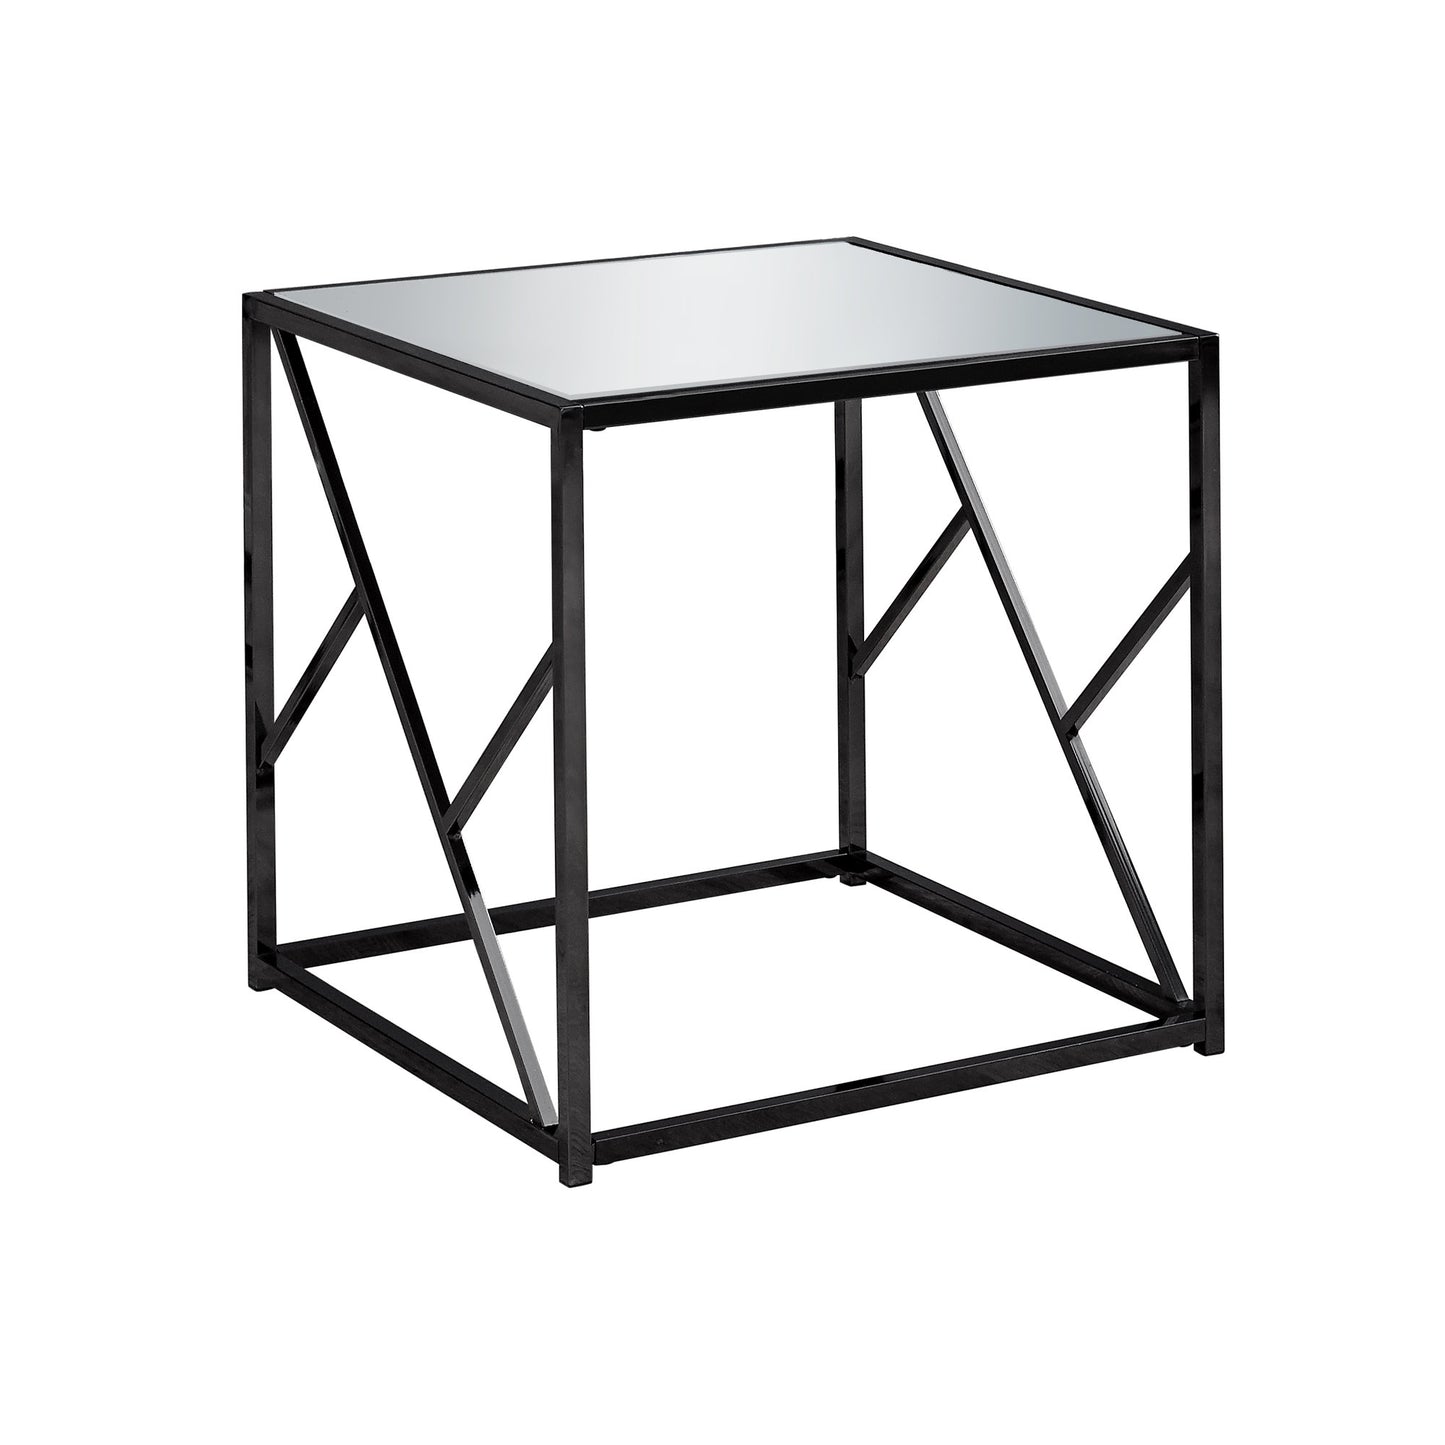 22" x 22" x 21.75" Black Metal Glass Finish End Table with a Mirror Top